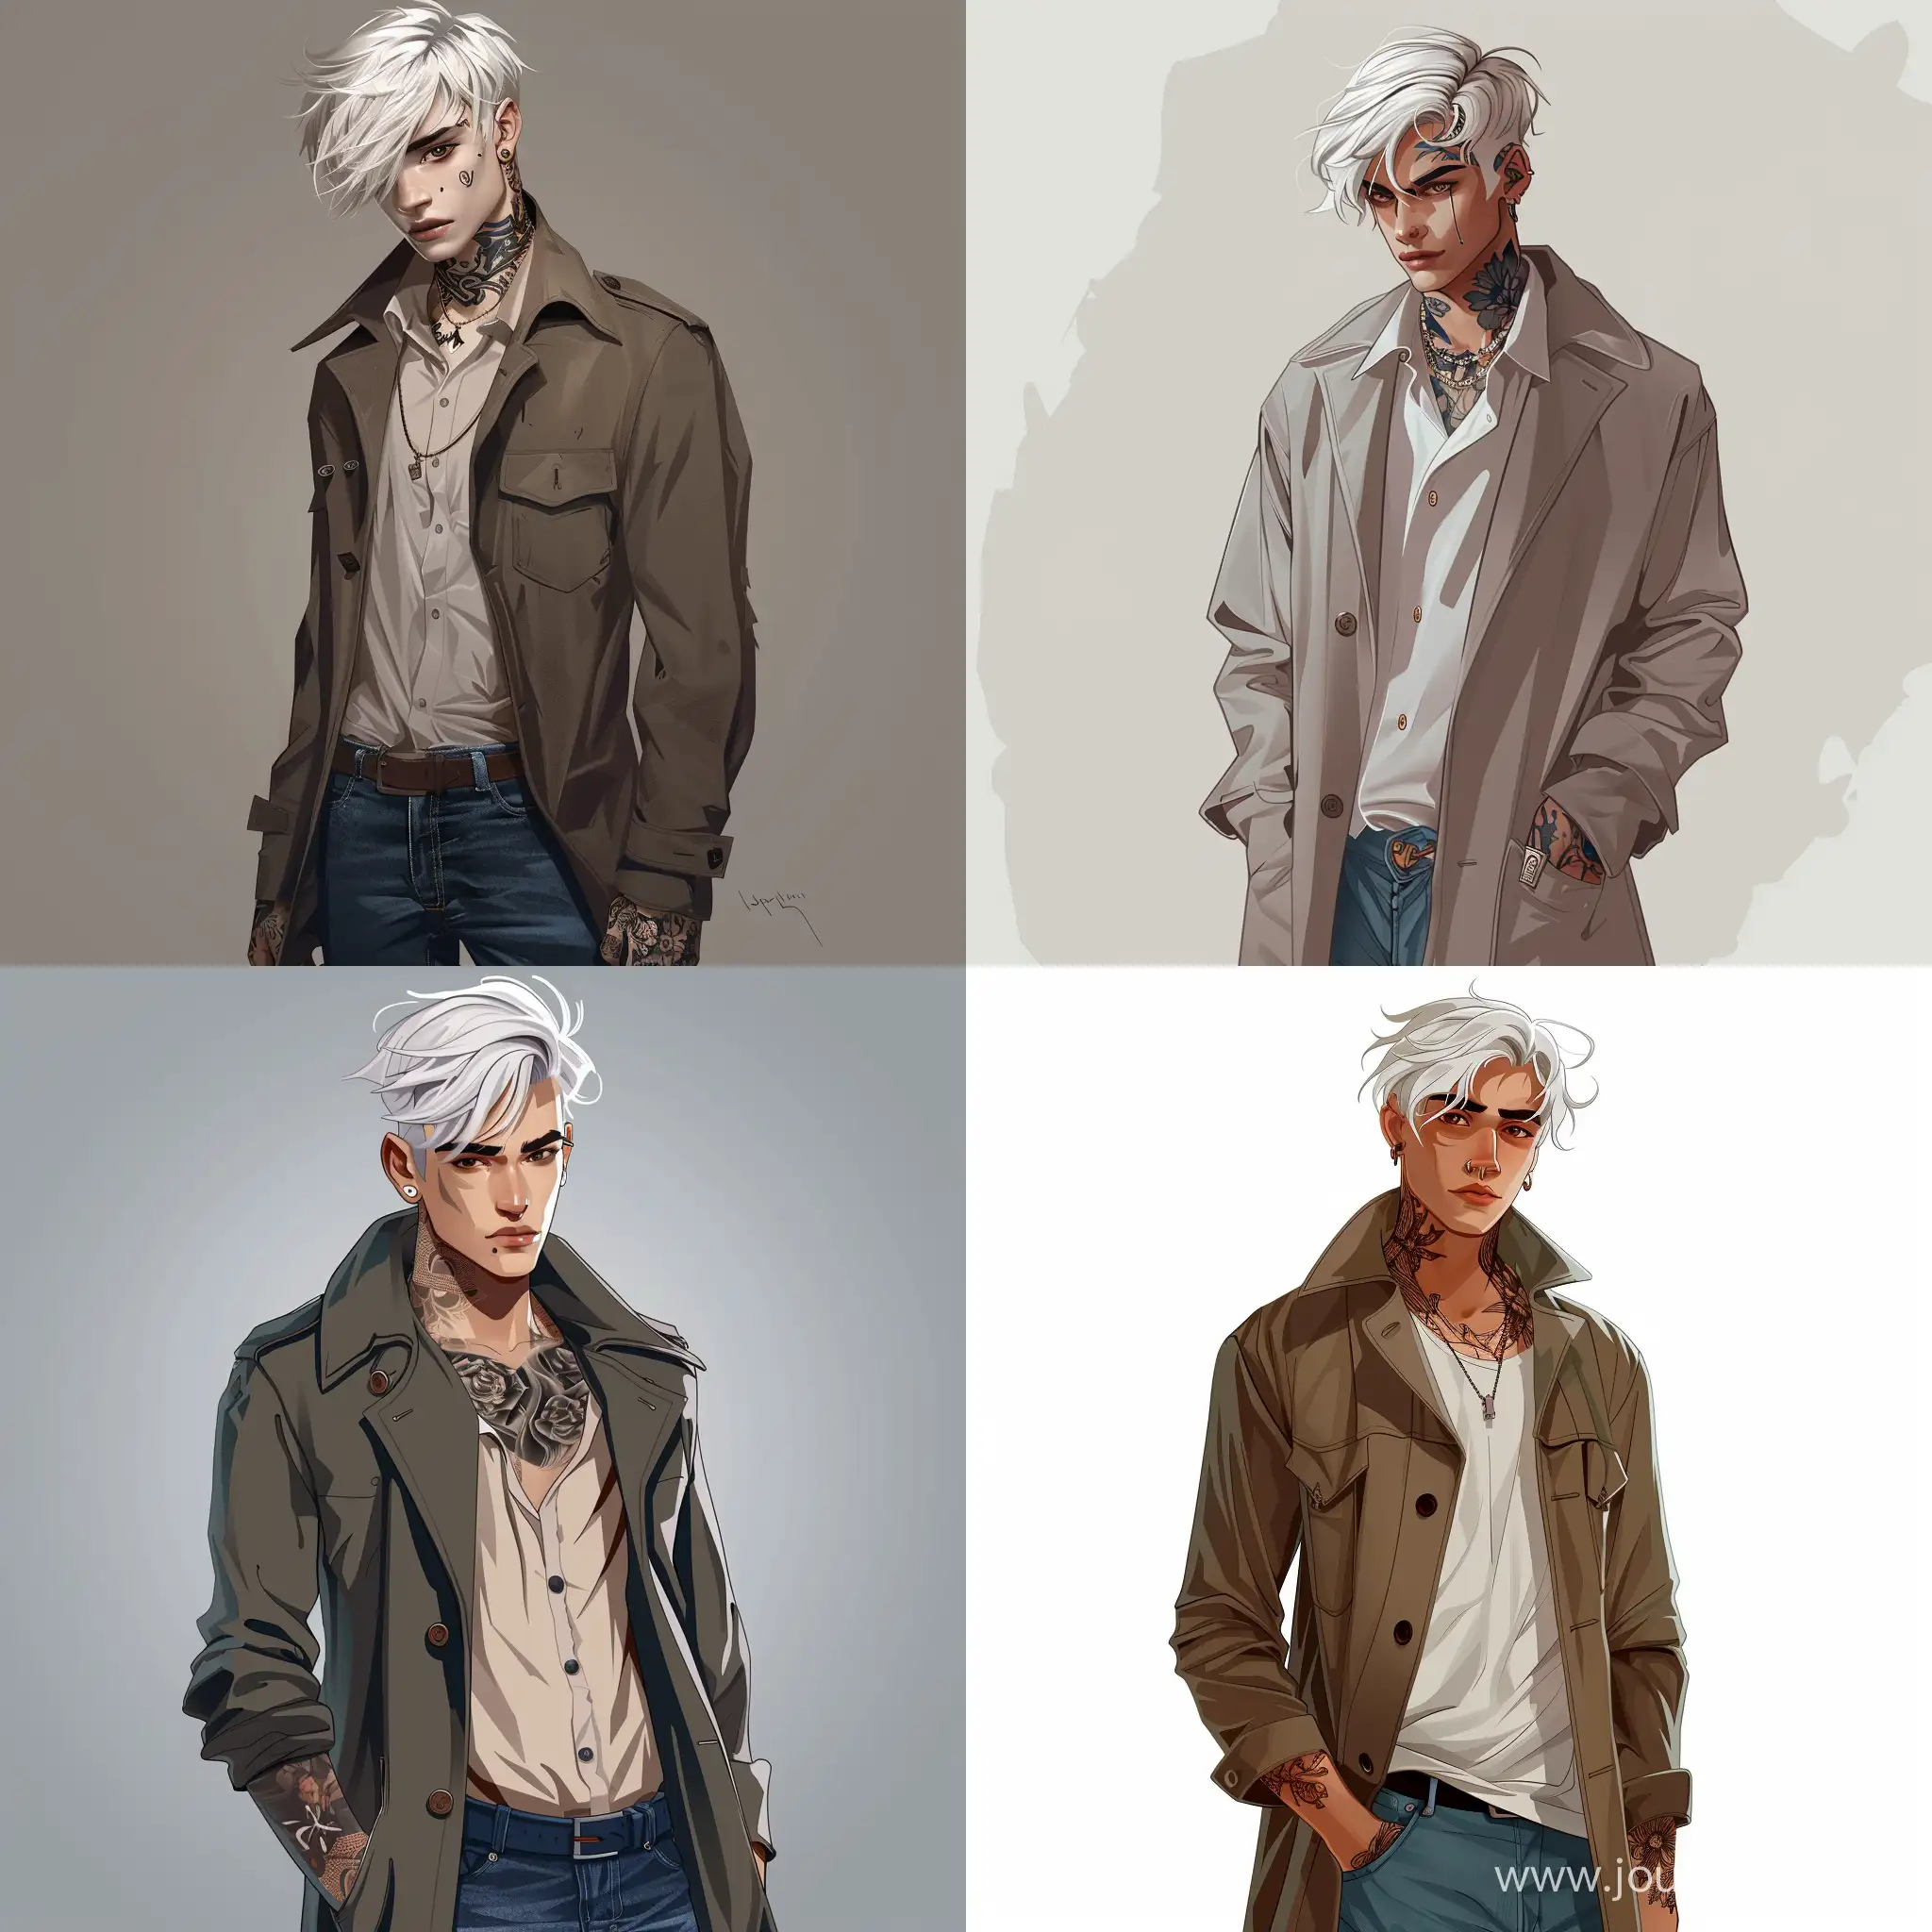 Handsome guy, white hair, dark brown eyes, white skin, young, teenager, 19 years old, neck tattoos, wearing a coat shirt and jeans, high quality, high detail, cartoon art